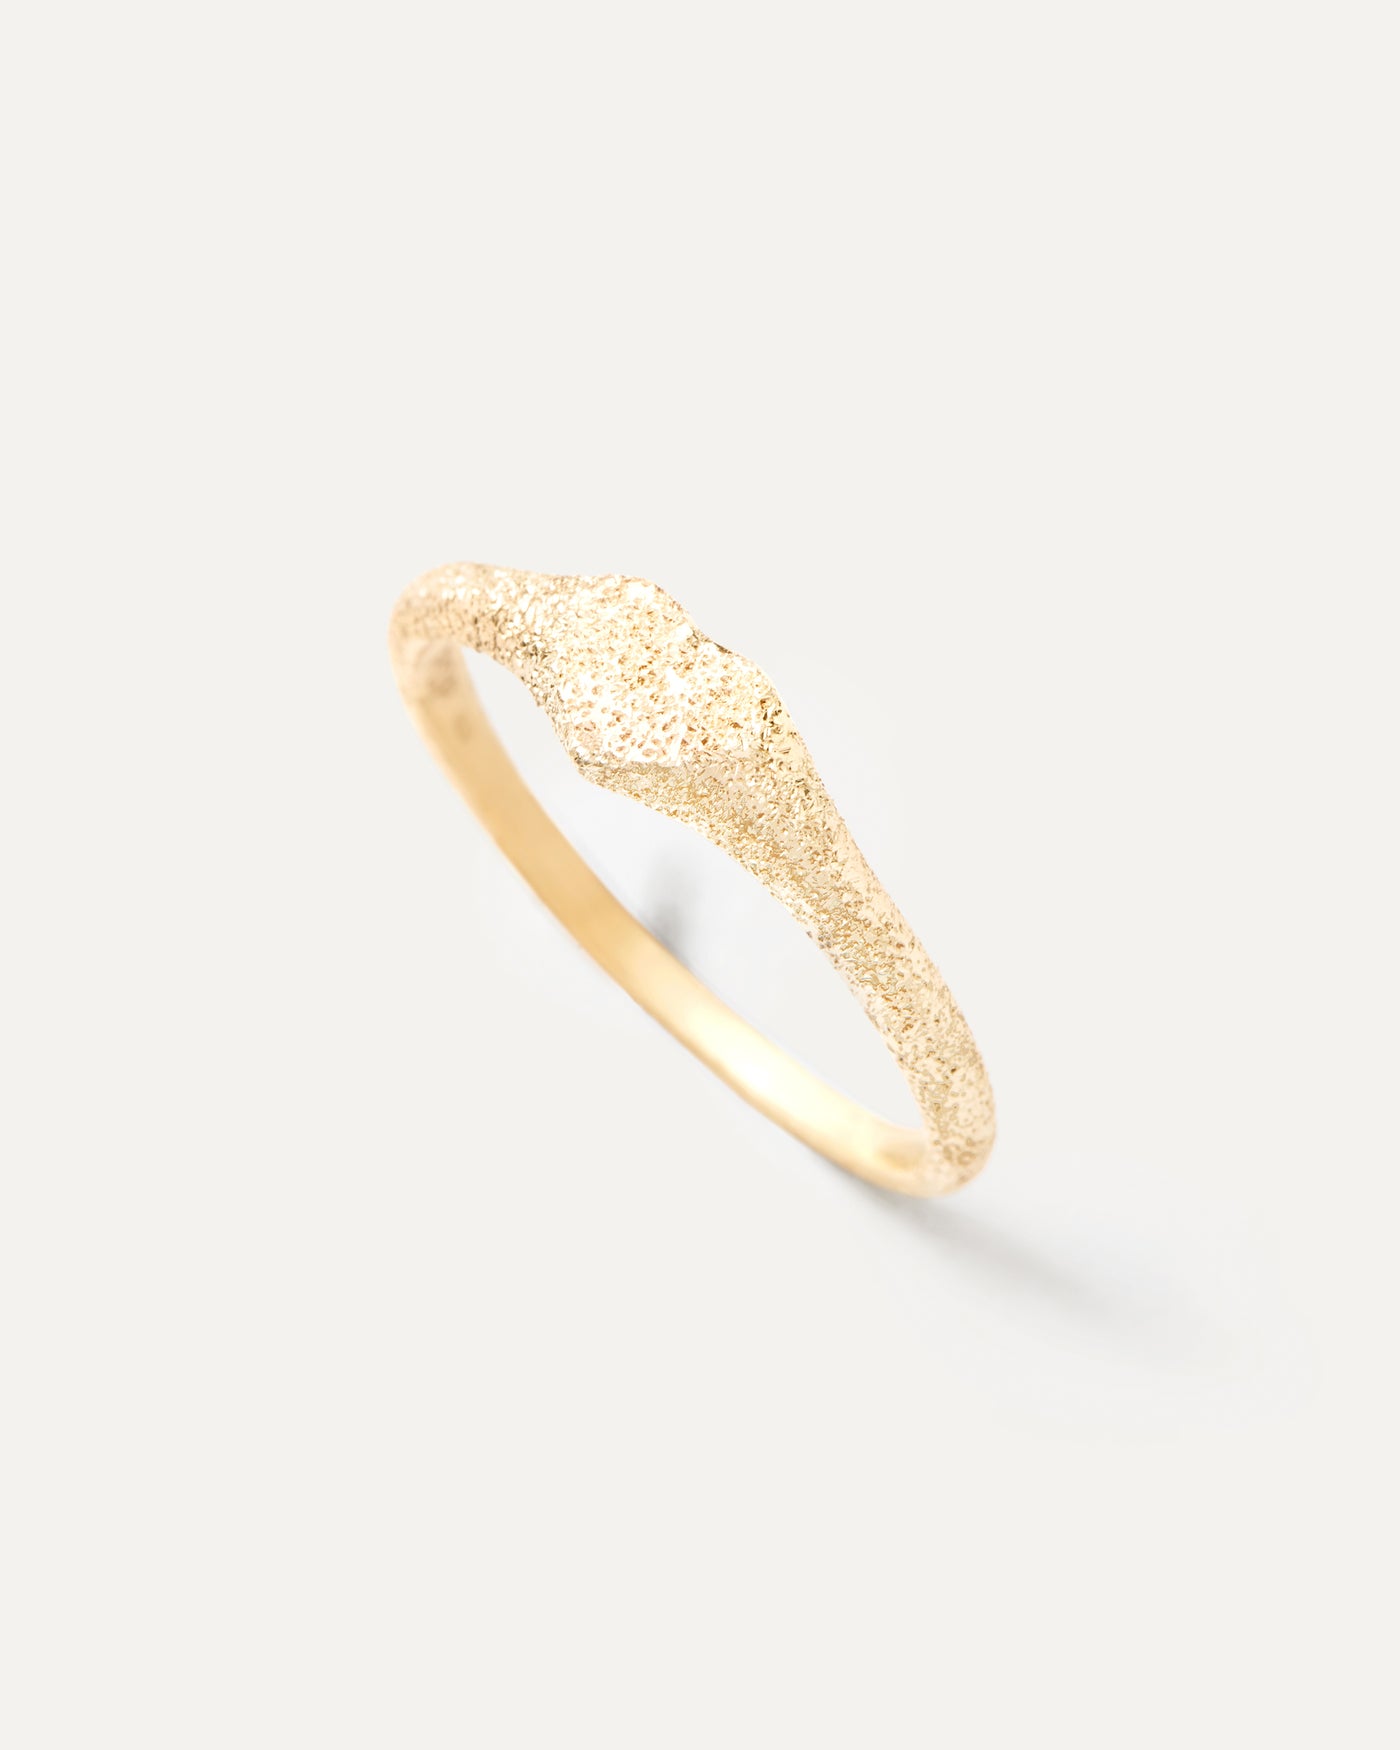 2023 Selection | Sandblasted Gold Heart Stamp Ring. Heart-shaped signet ring in solid 18K yellow gold with a sandblast finish. Get the latest arrival from PDPAOLA. Place your order safely and get this Best Seller. Free Shipping.